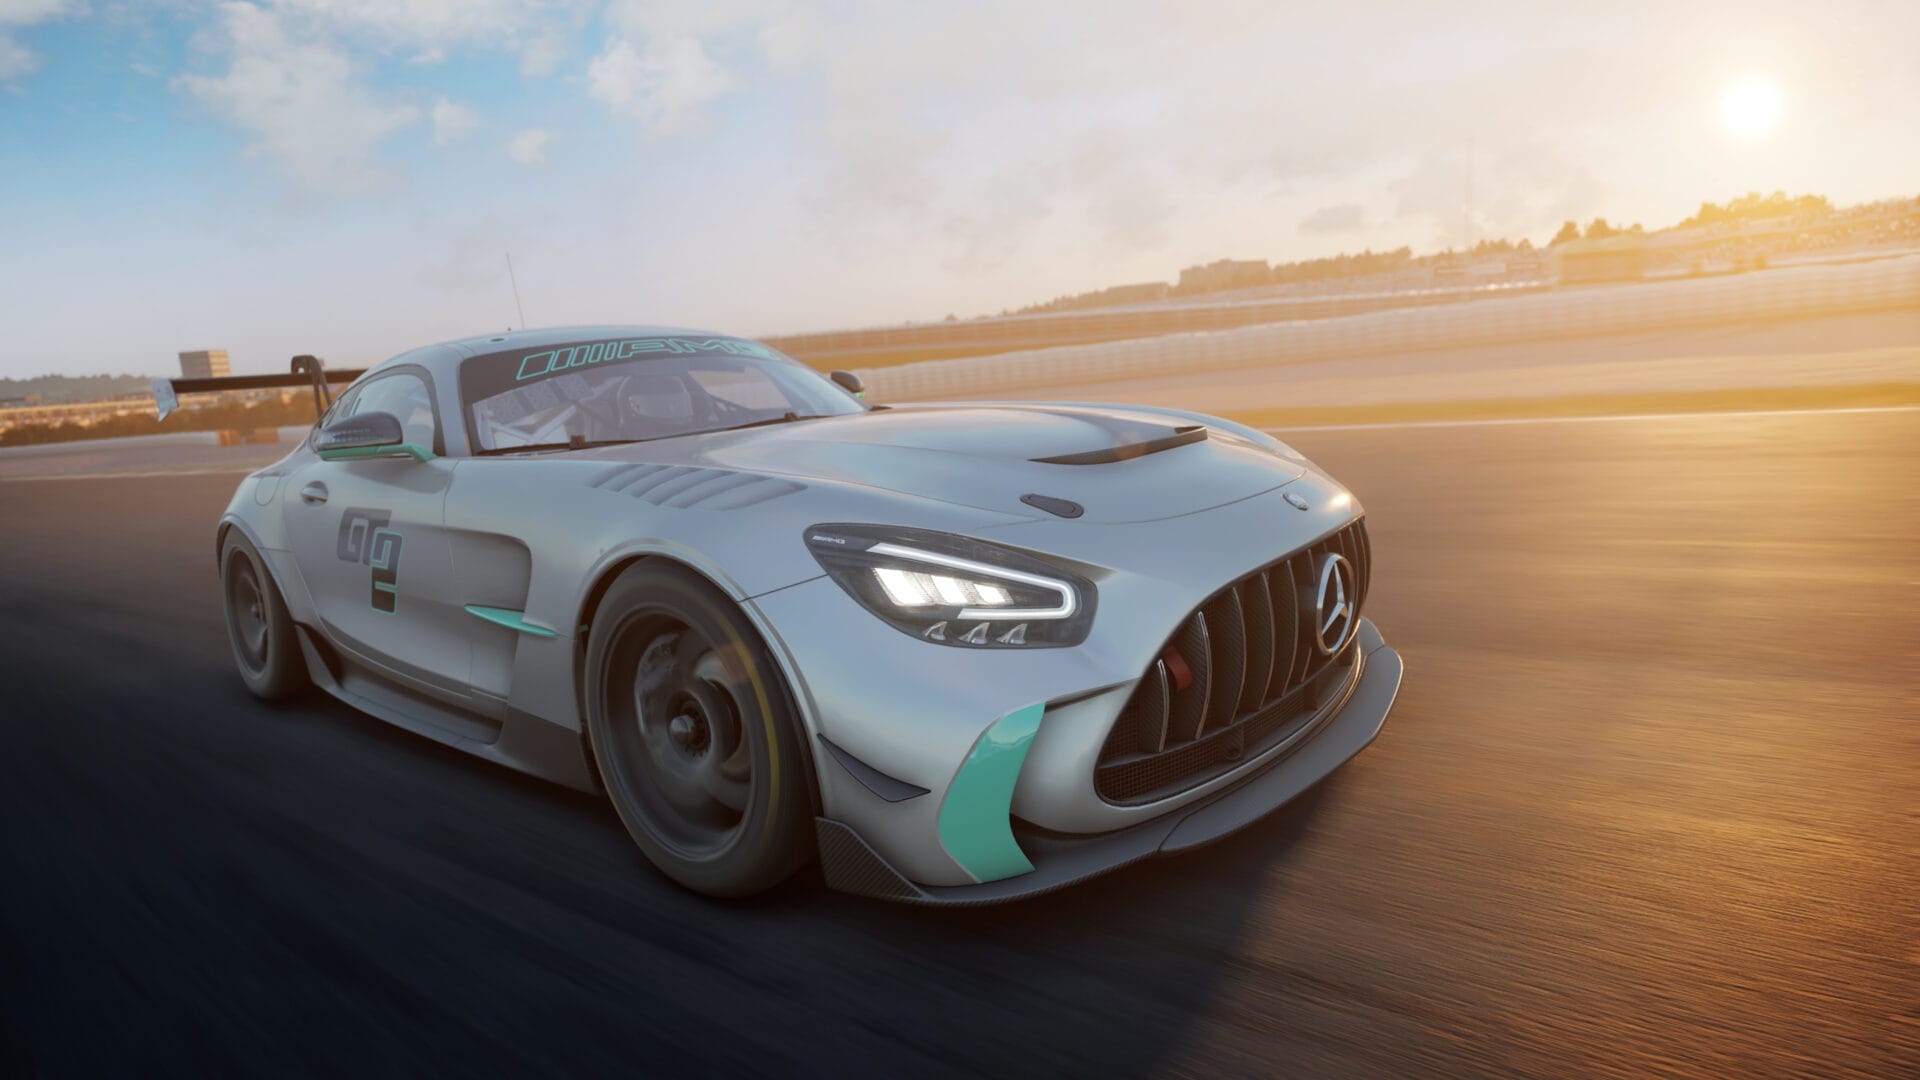 Cruise in style with the sleek Grey Mercedes-AMG GT2 in Assetto Corsa Competizione